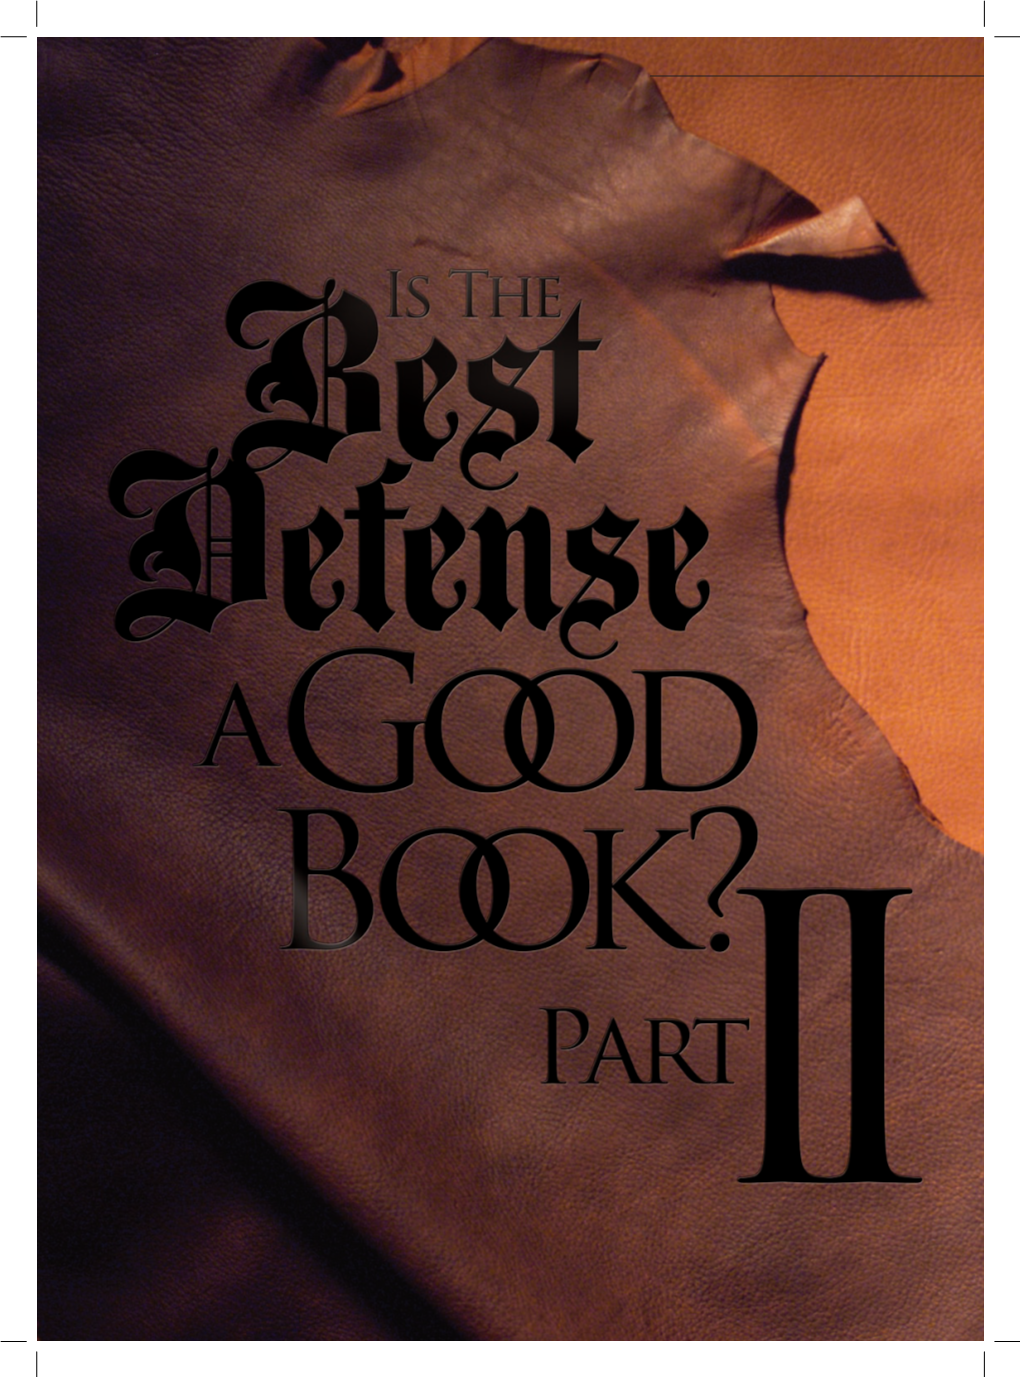 Is the Best Defense a Good Book? Part II